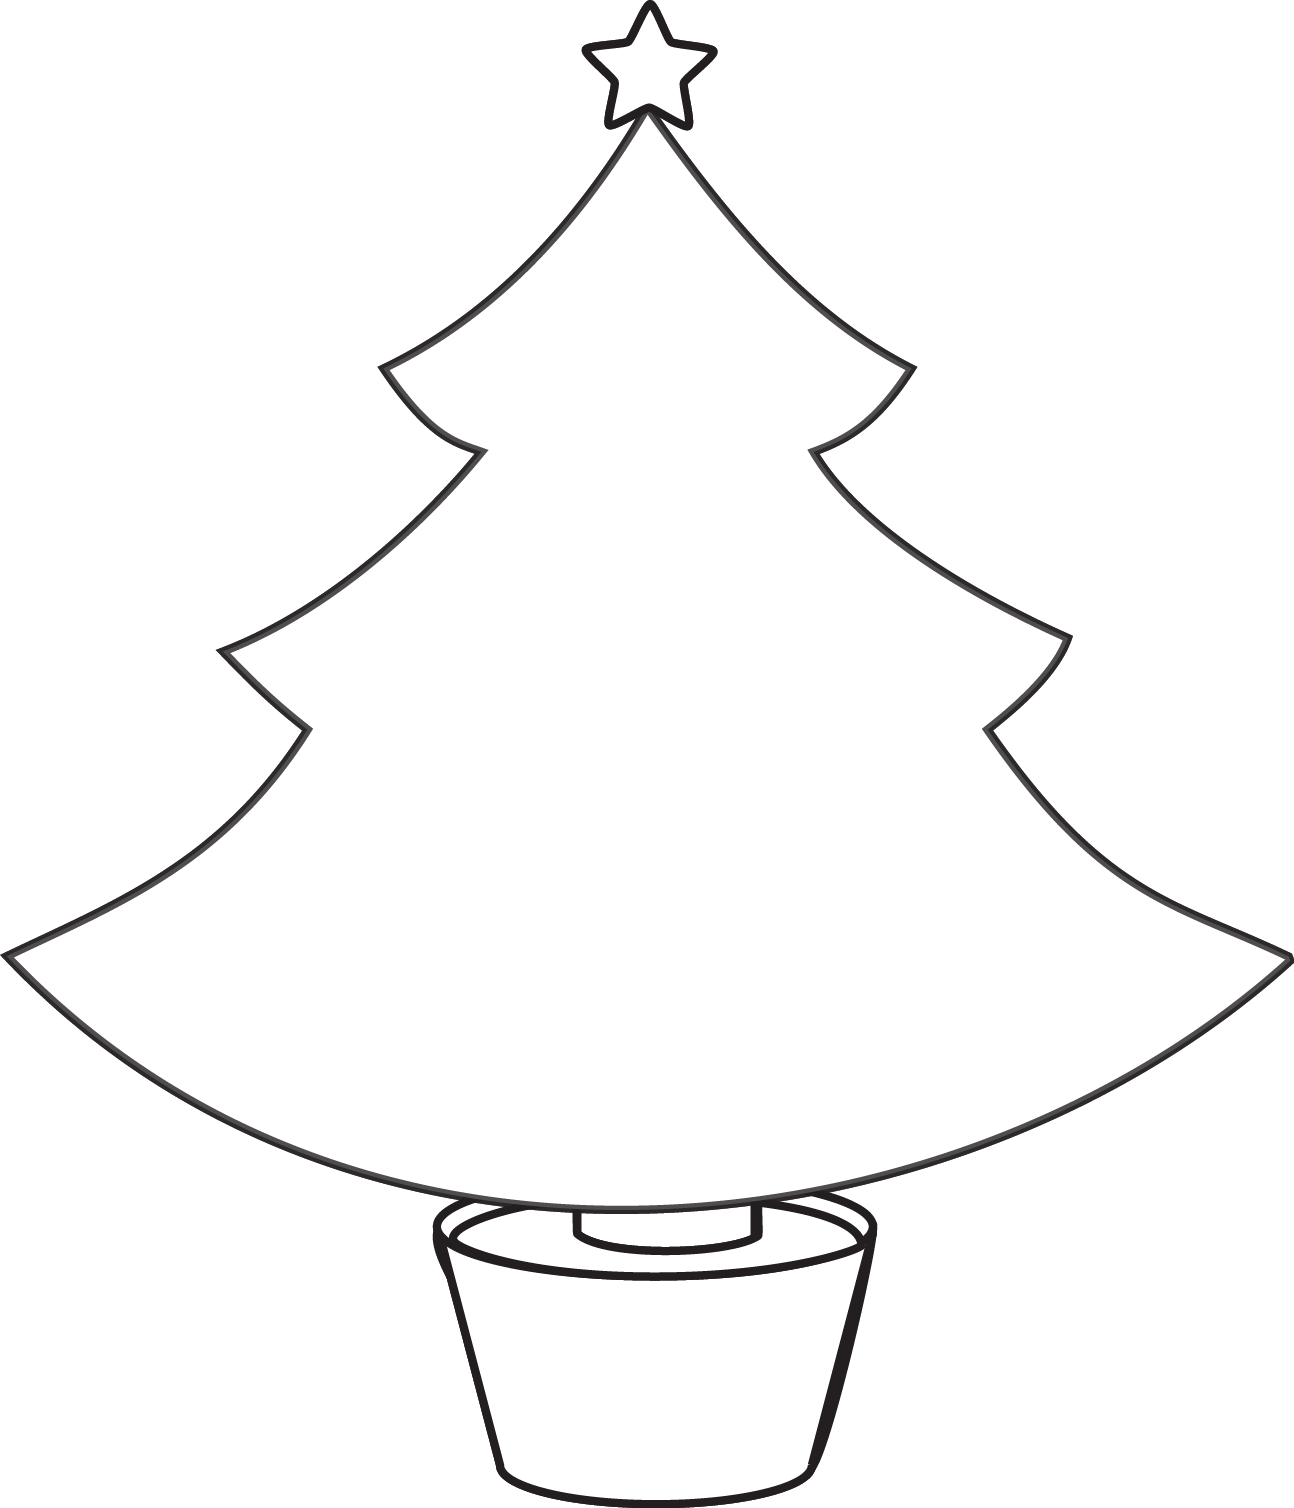 Free Printable Christmas Tree Coloring Pages For Kids Archives ...